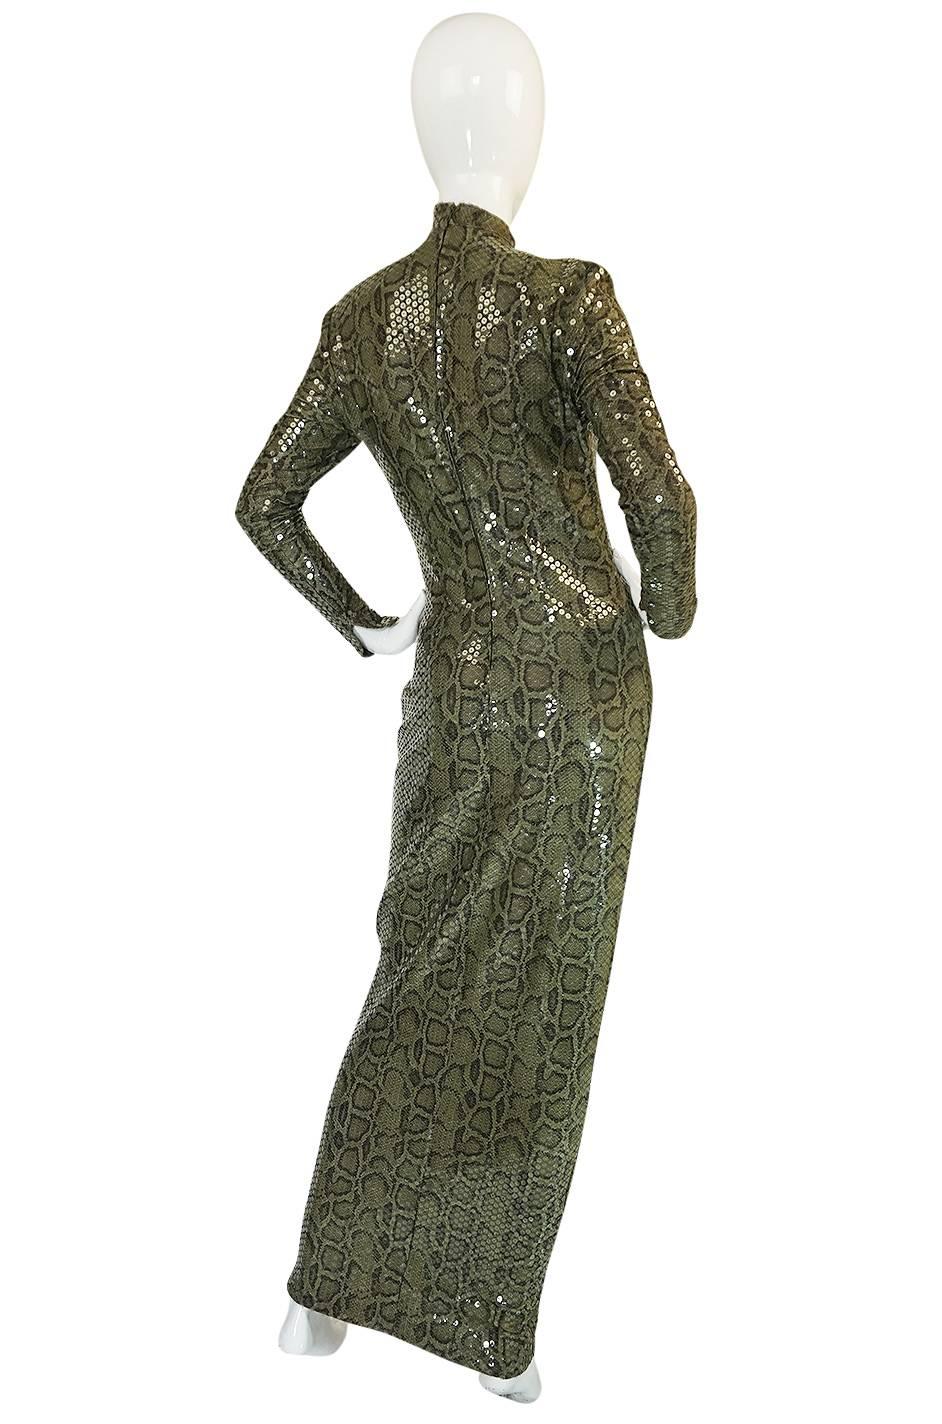 Iconic S/S 1983 Thierry Mugler Sequin Snakeskin Python Dress at 1stDibs ...